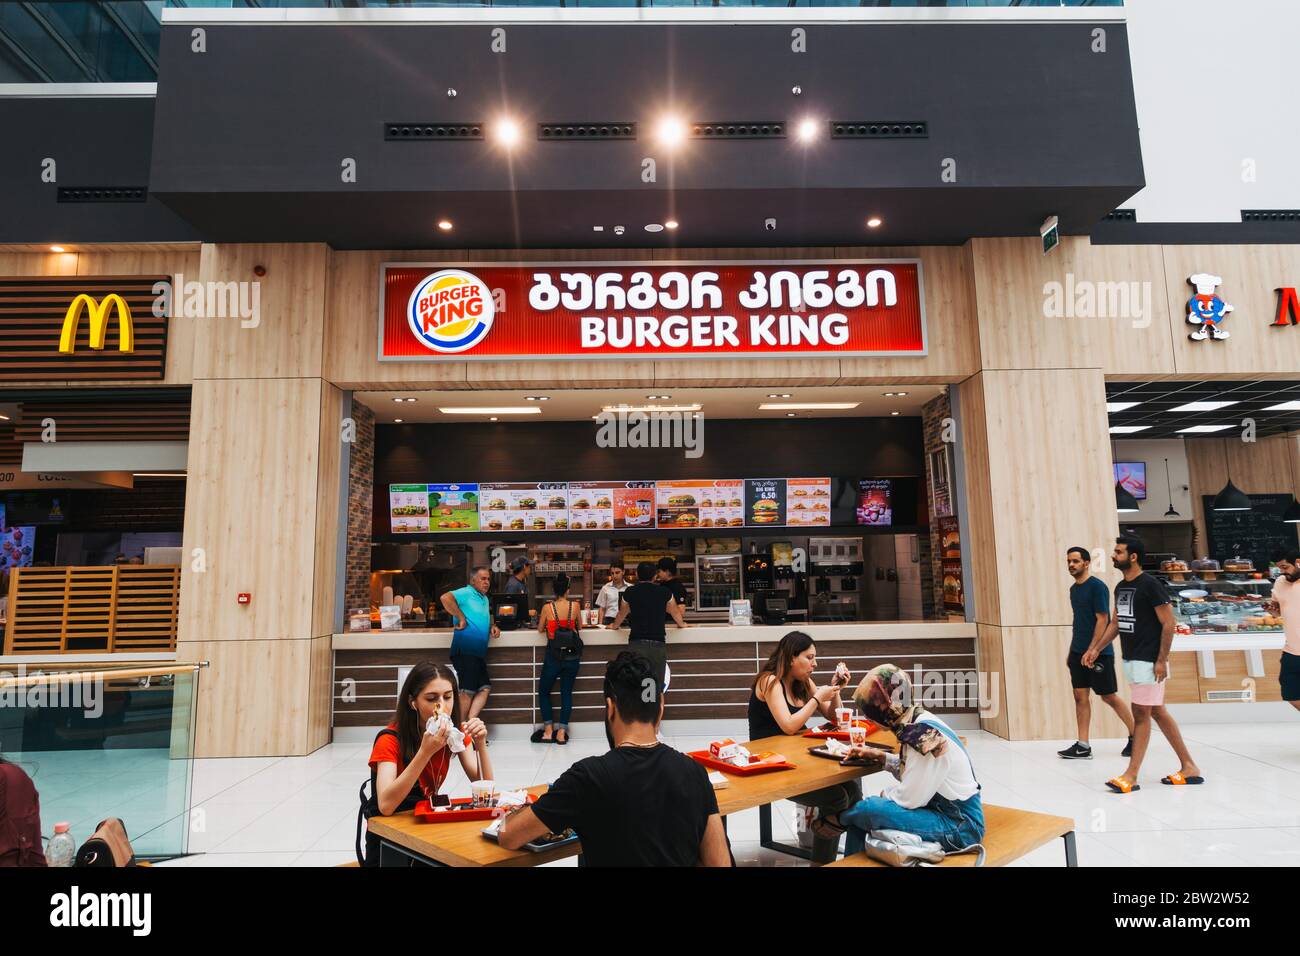 A Burger King Restaurant In A Tbilisi Shopping Mall Georgia The Words Have Also Been Translated To Georgian Script Stock Photo Alamy